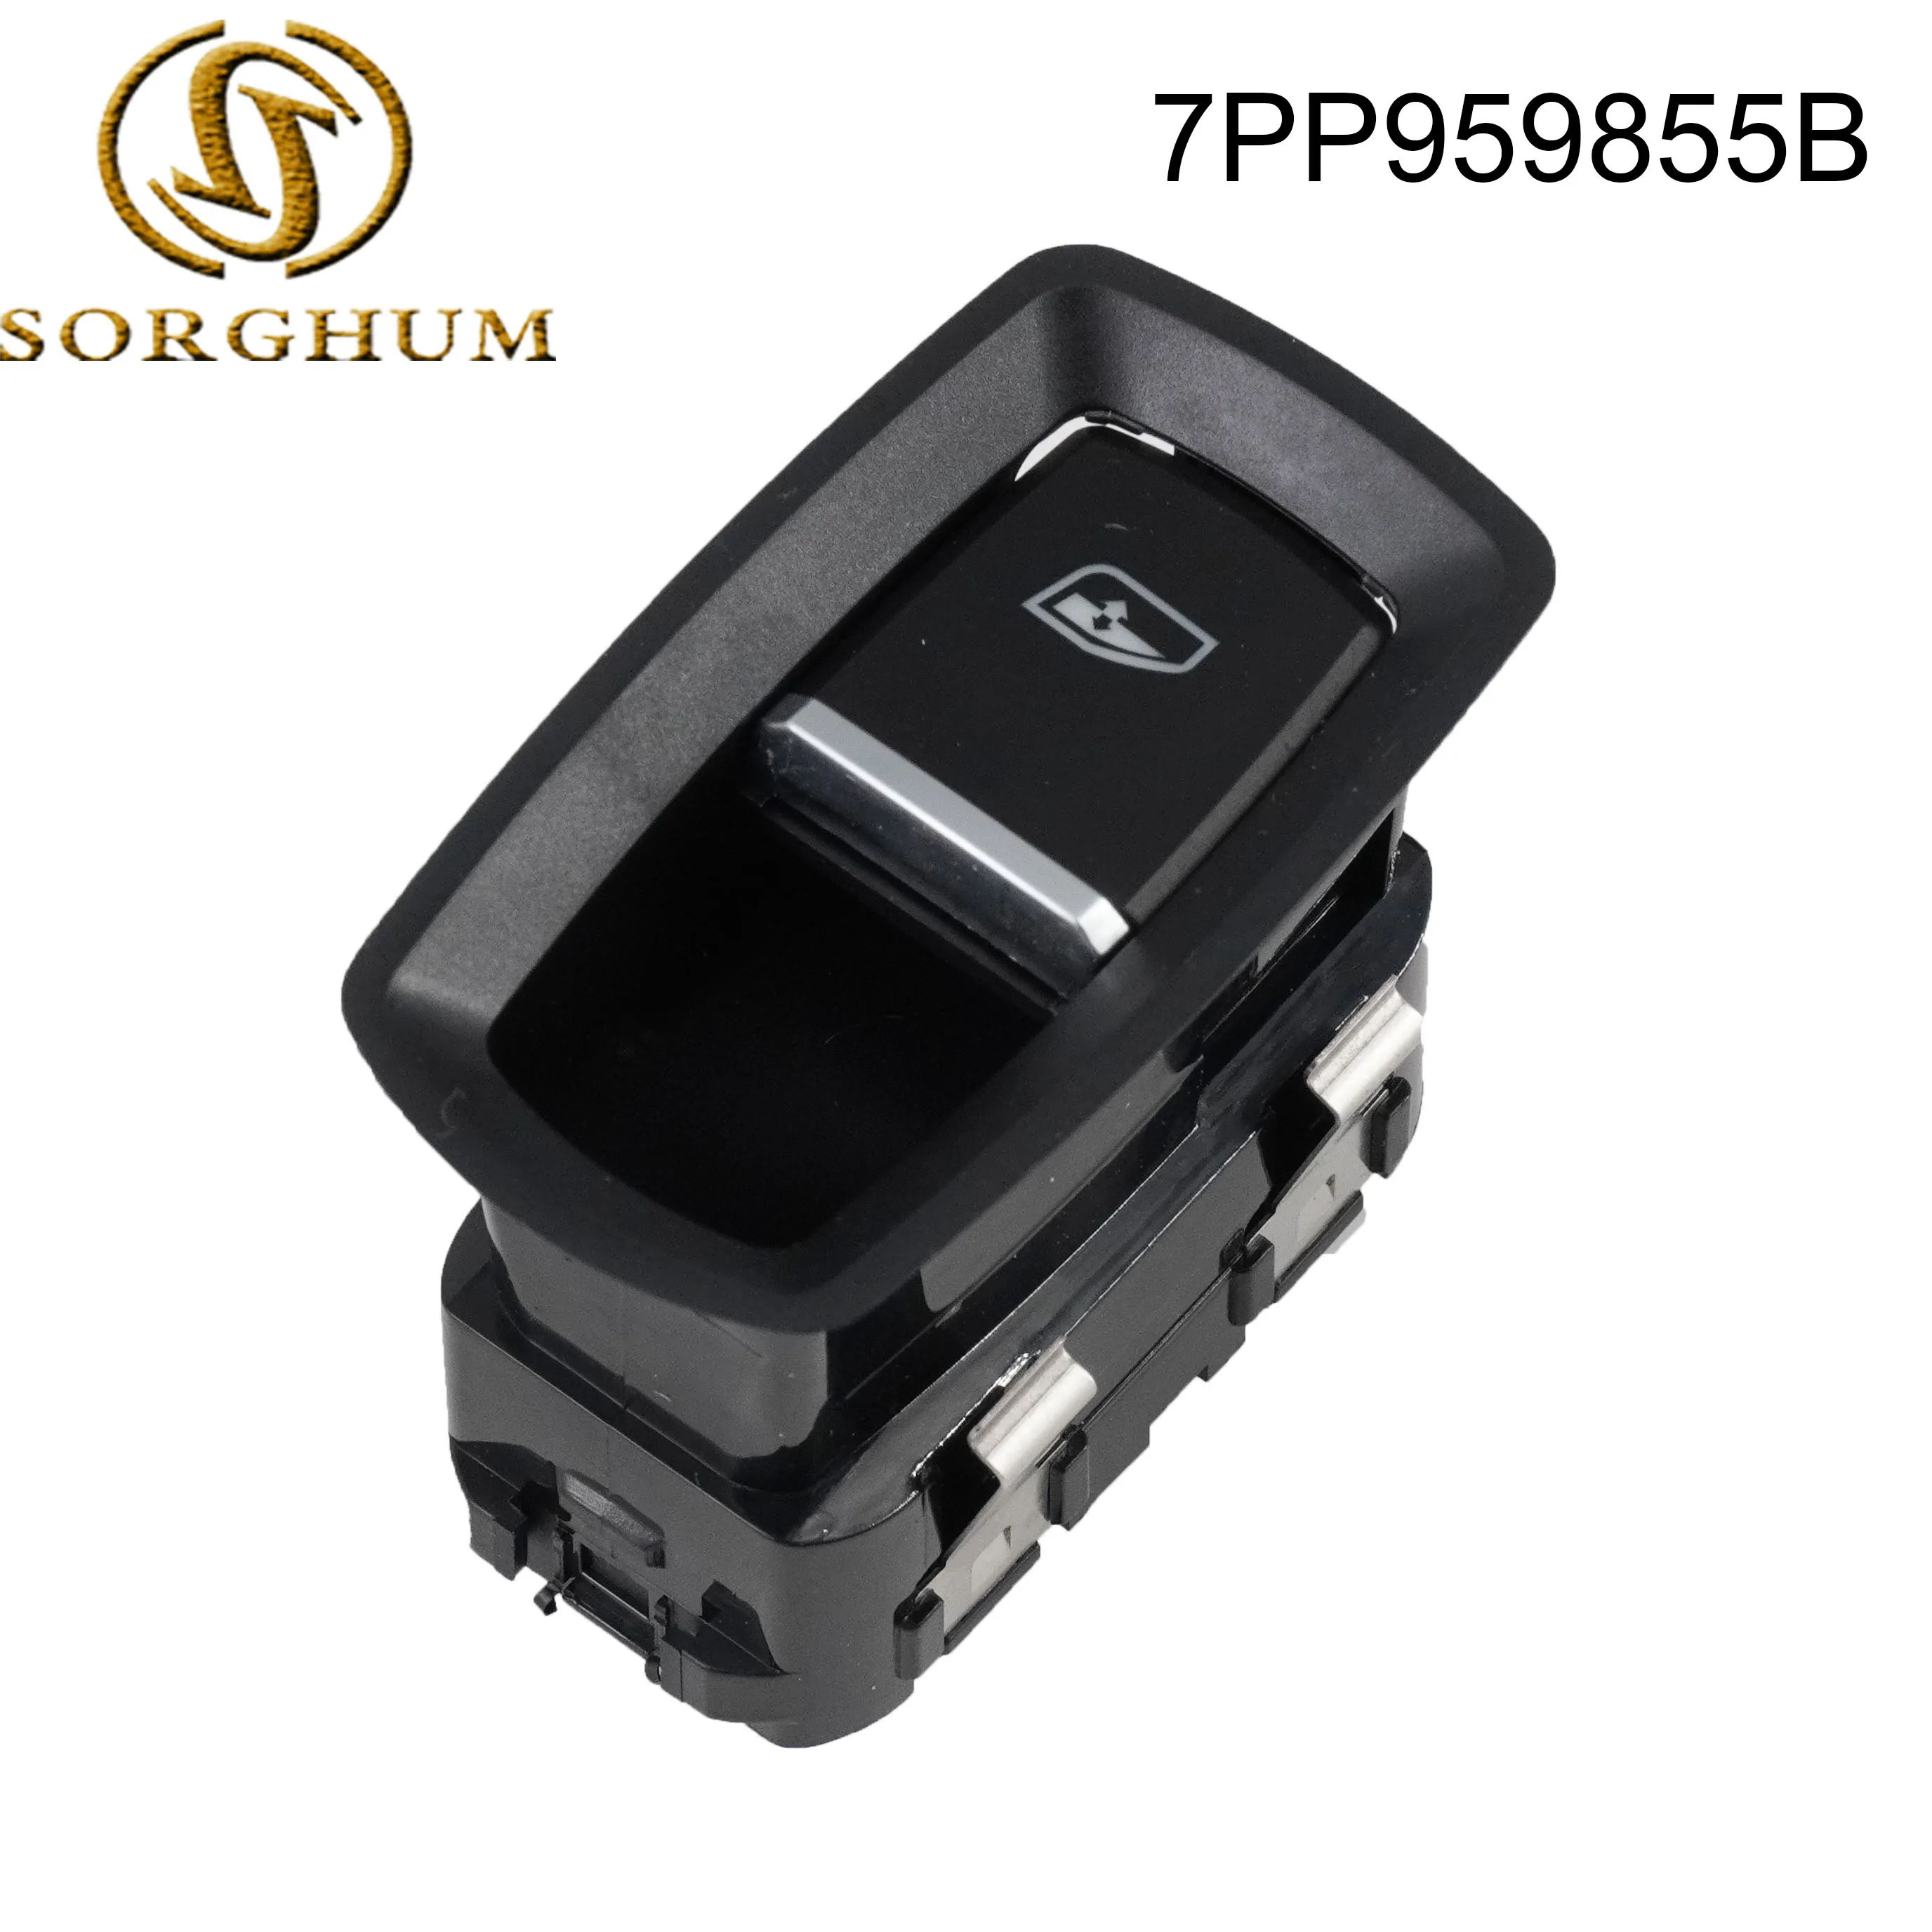 

7PP959855BDML 7PP959855B Electric Window Switch Button For Porsche Panamera Cayenne Macan Boxster 911 918